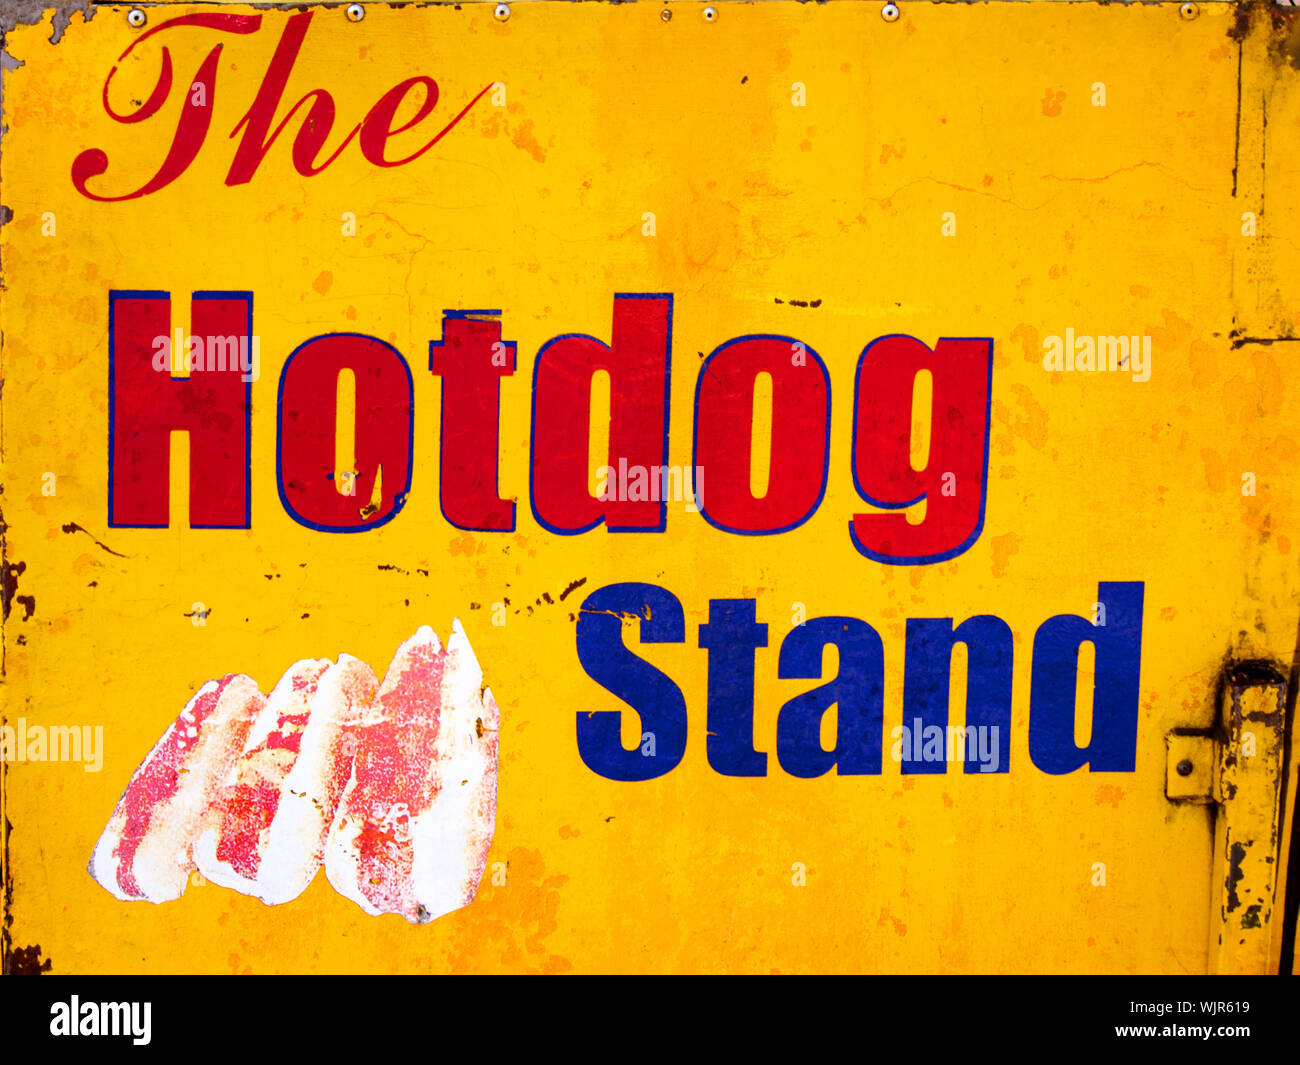 close up of a hotdog stand sign Stock Photo